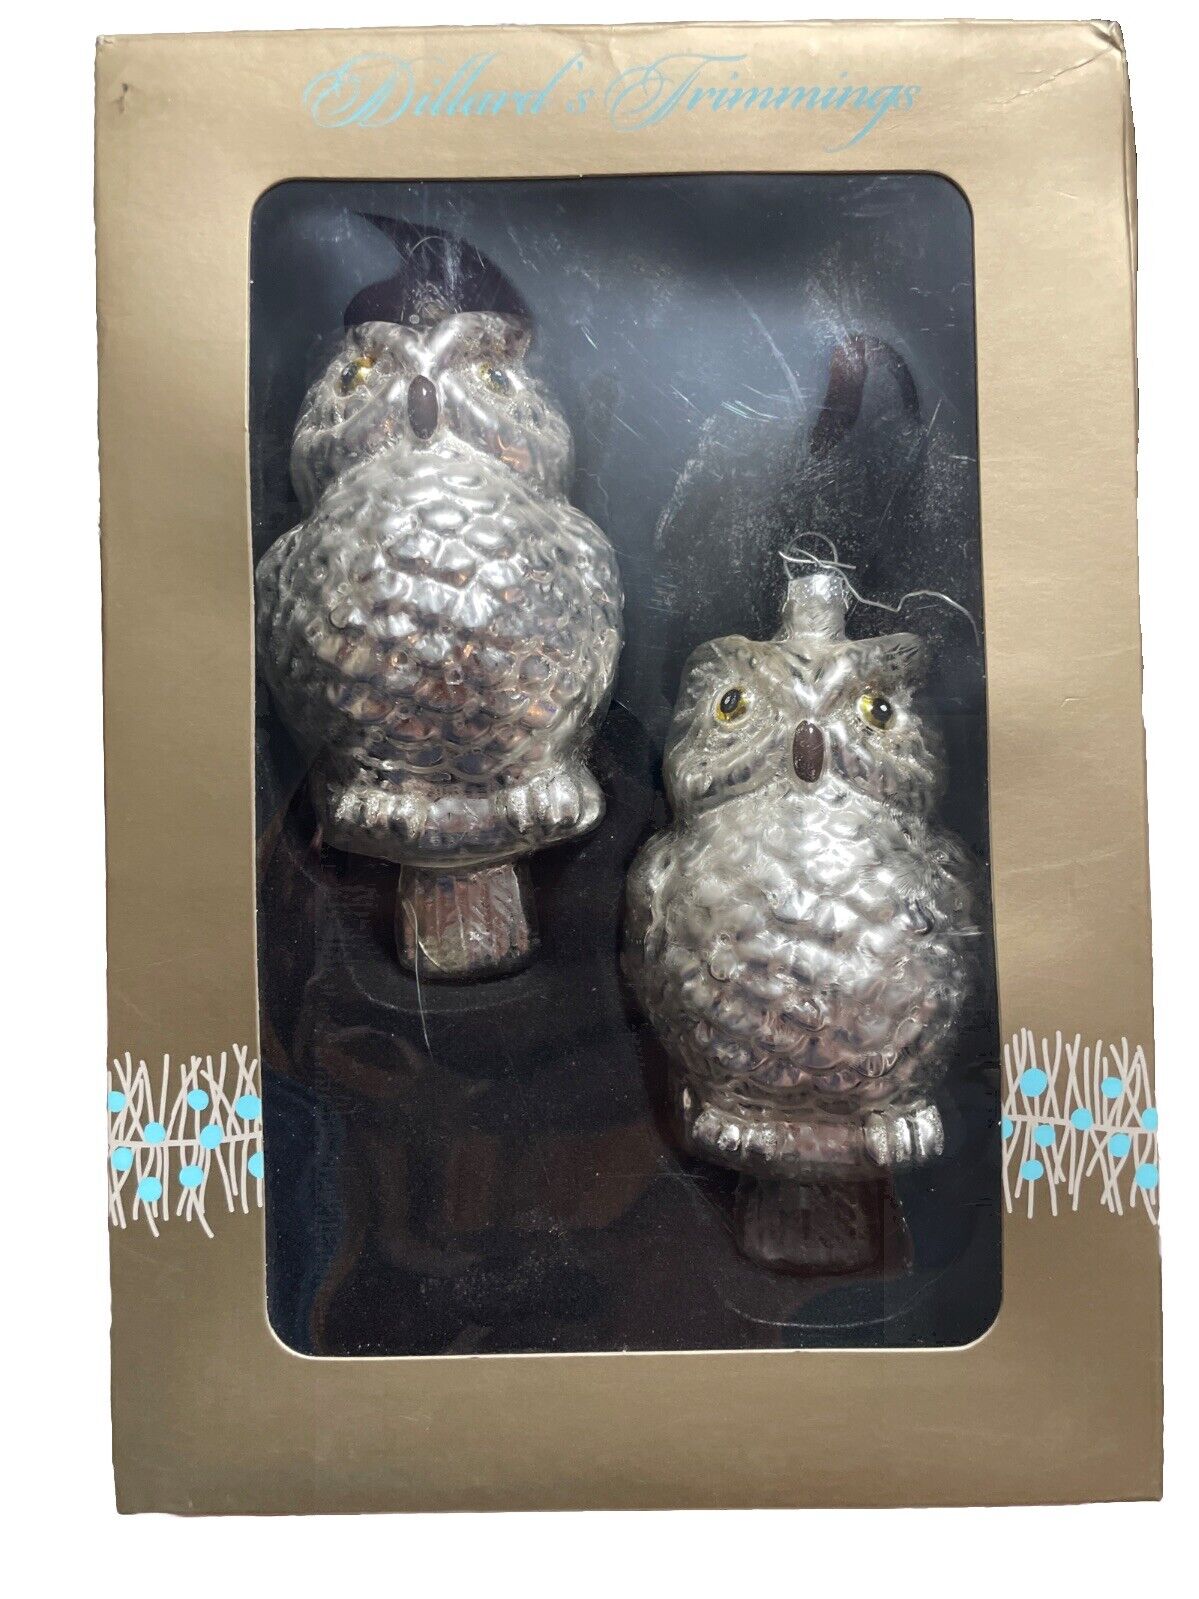 Vintage Dillard\'s Trimmings 6 Inch Silver Owls Ornaments in Box Christmas